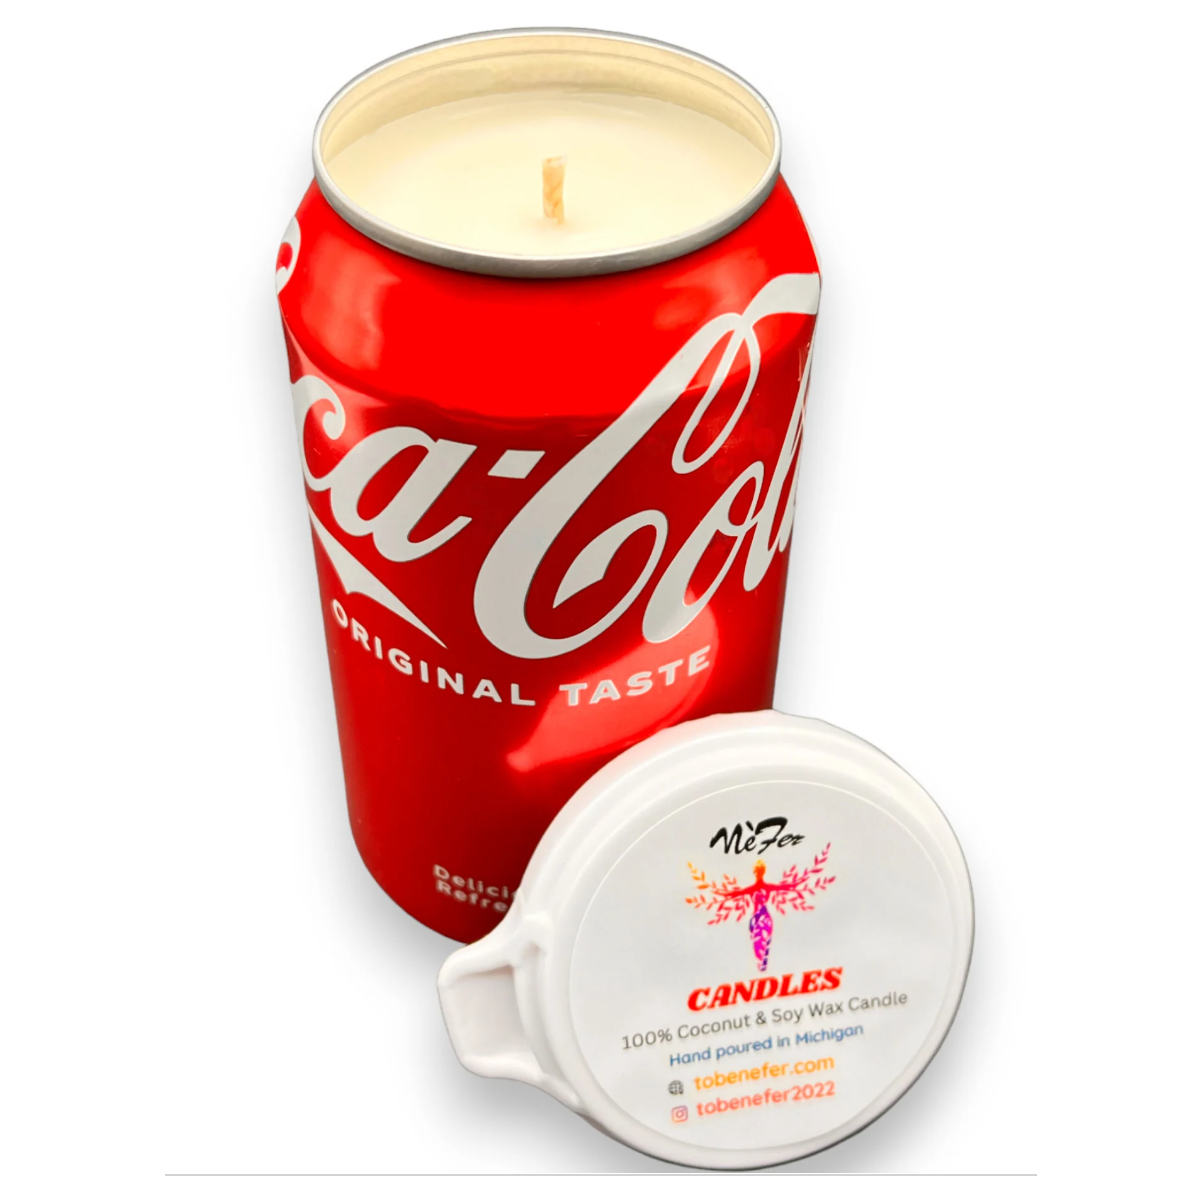 Coke Candle | Hand Poured Soda Can Candle | 12 oz Soda-Themed